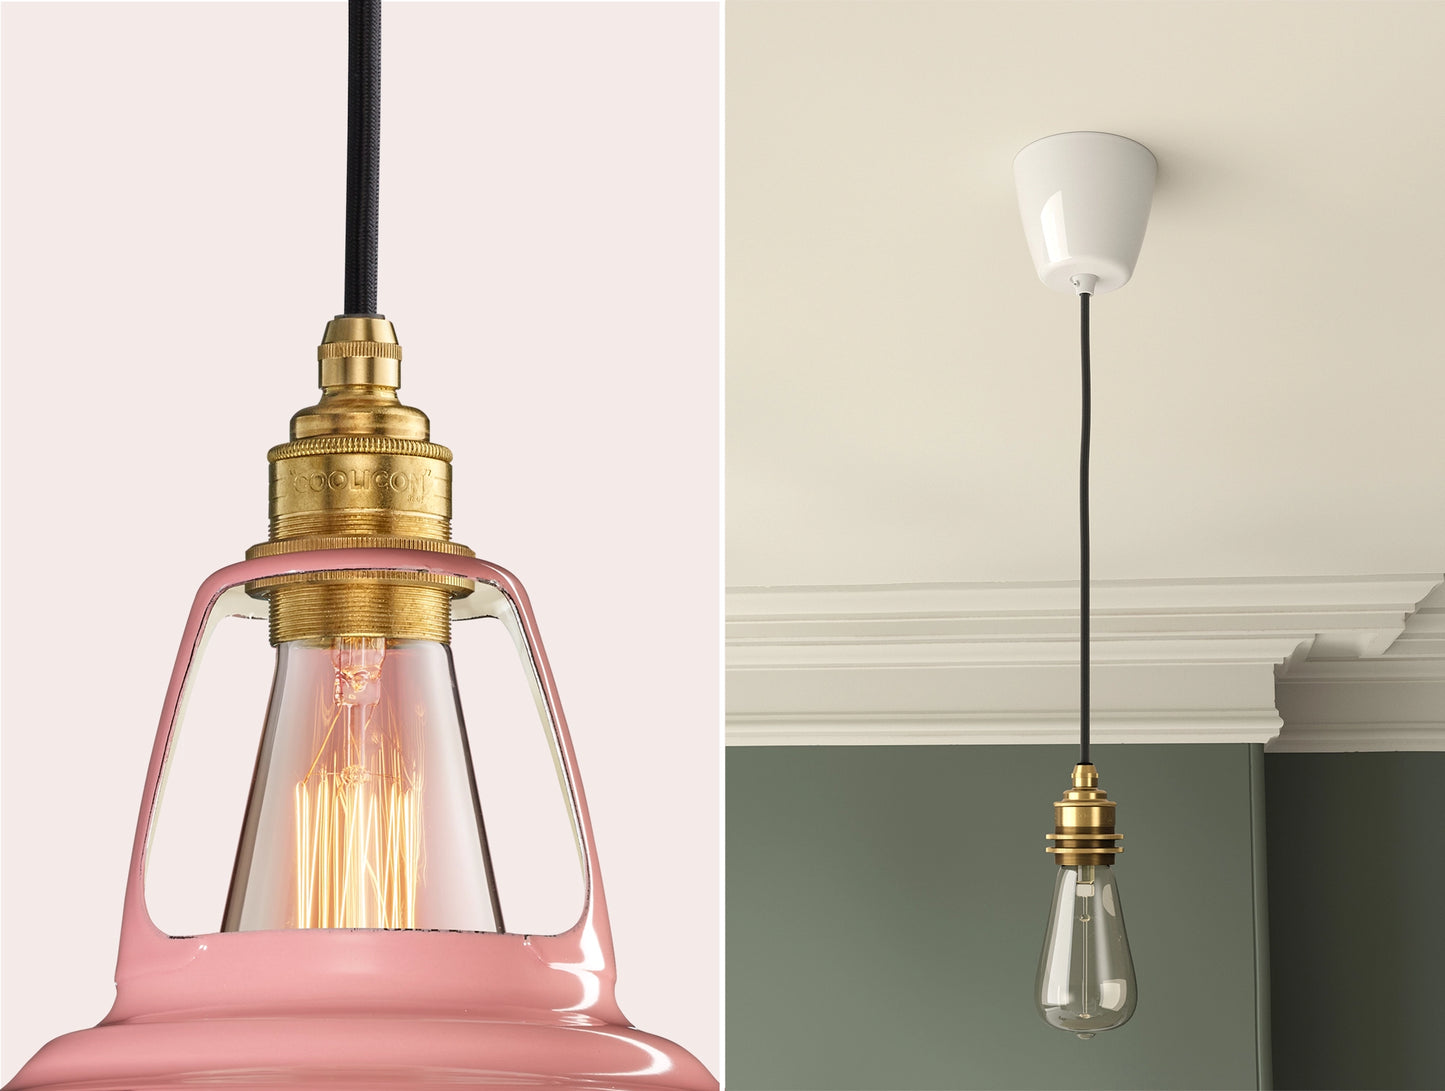 Close up of an E27 Signature Brass suspension set on a Powder Pink lampshade on the left. On the right, an E27 Brass pendant set with a lightbulb is hanging from the ceiling